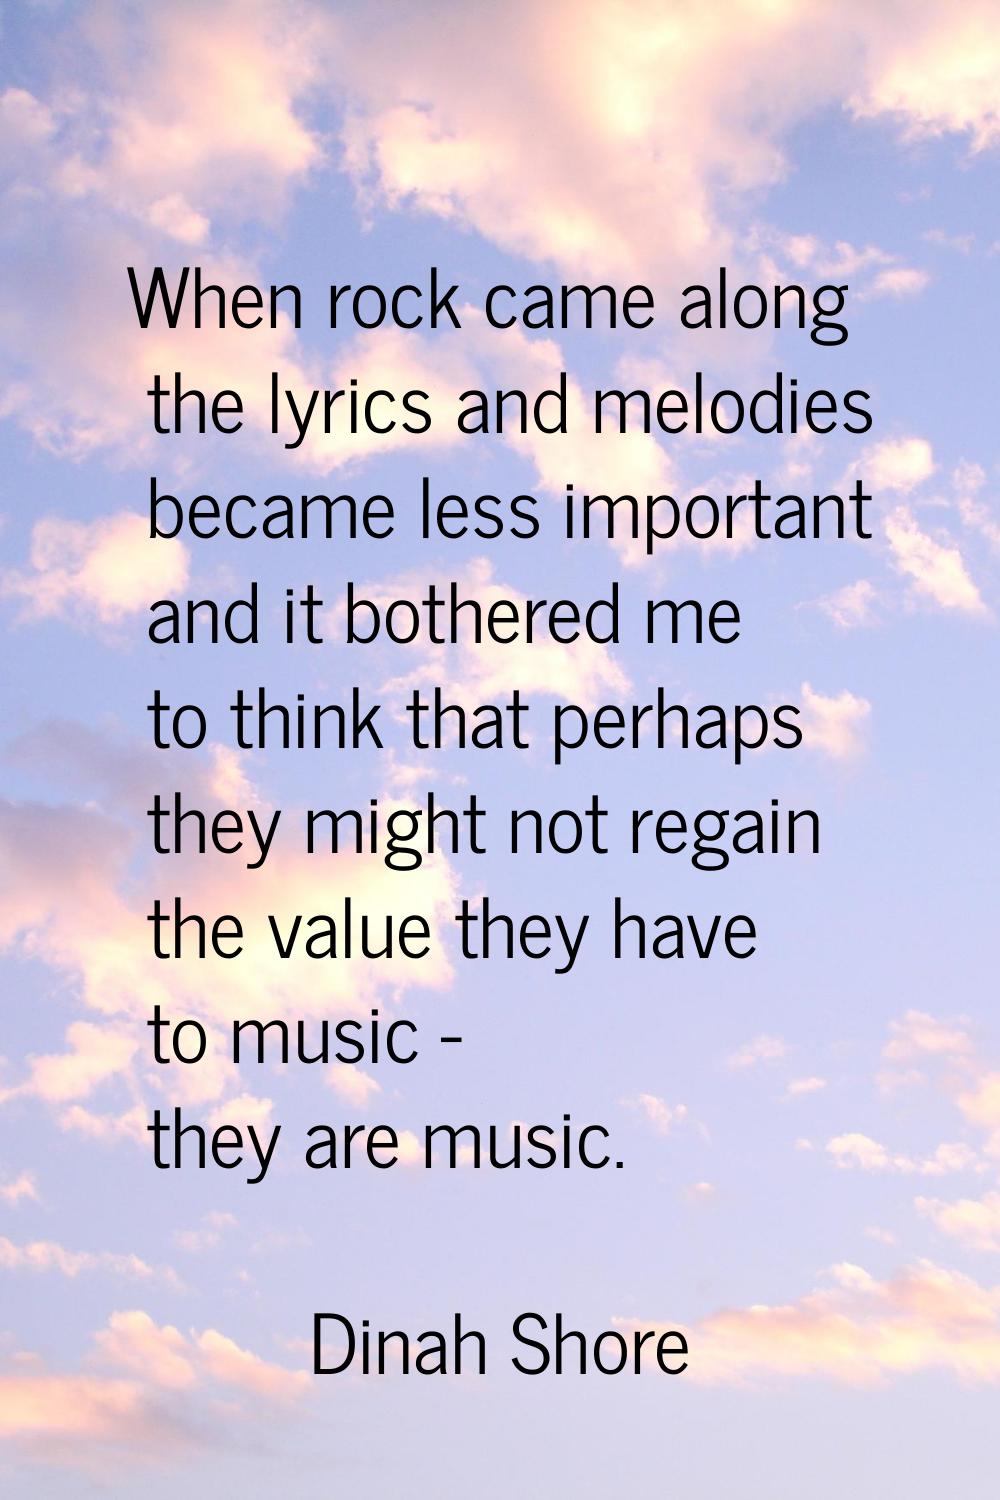 When rock came along the lyrics and melodies became less important and it bothered me to think that